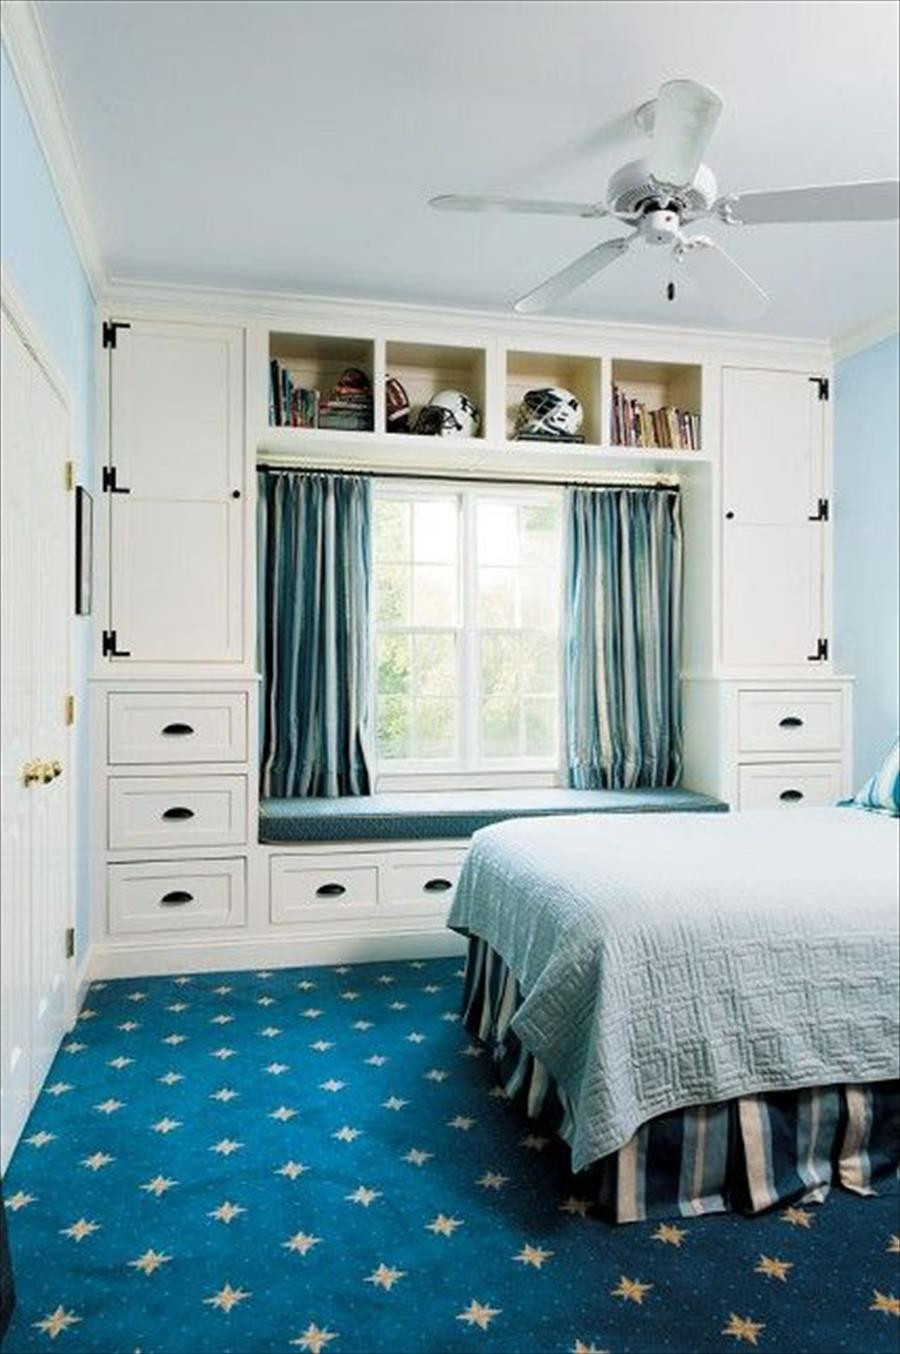 Storage Ideas For Small Bedrooms
 31 Simple But Smart Bedroom Storage Ideas